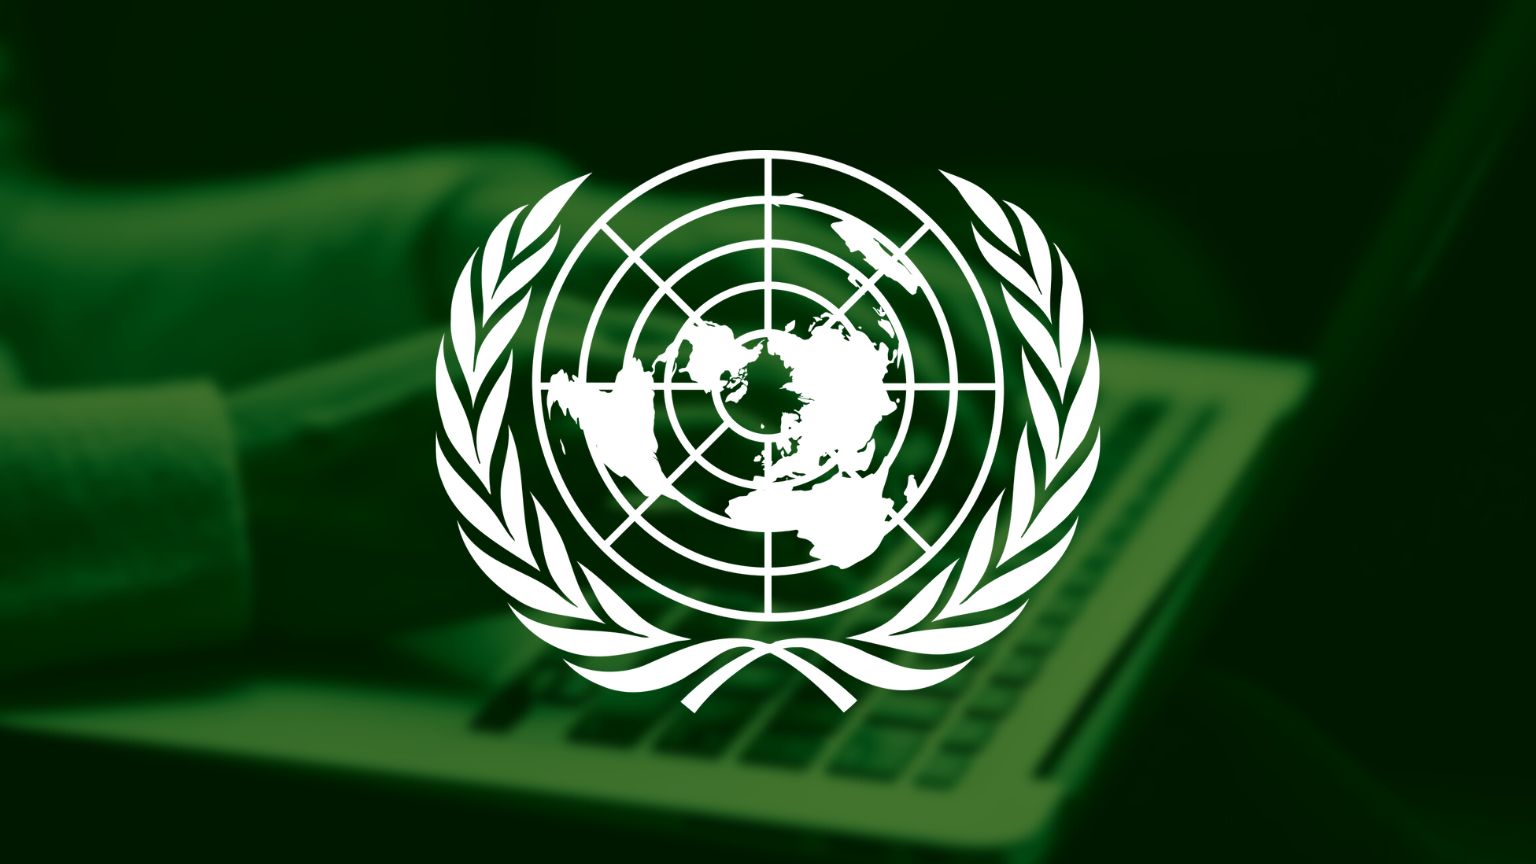 The UN is Building a “Digital Army” To Fight What it Calls “Deadly Disinformation”